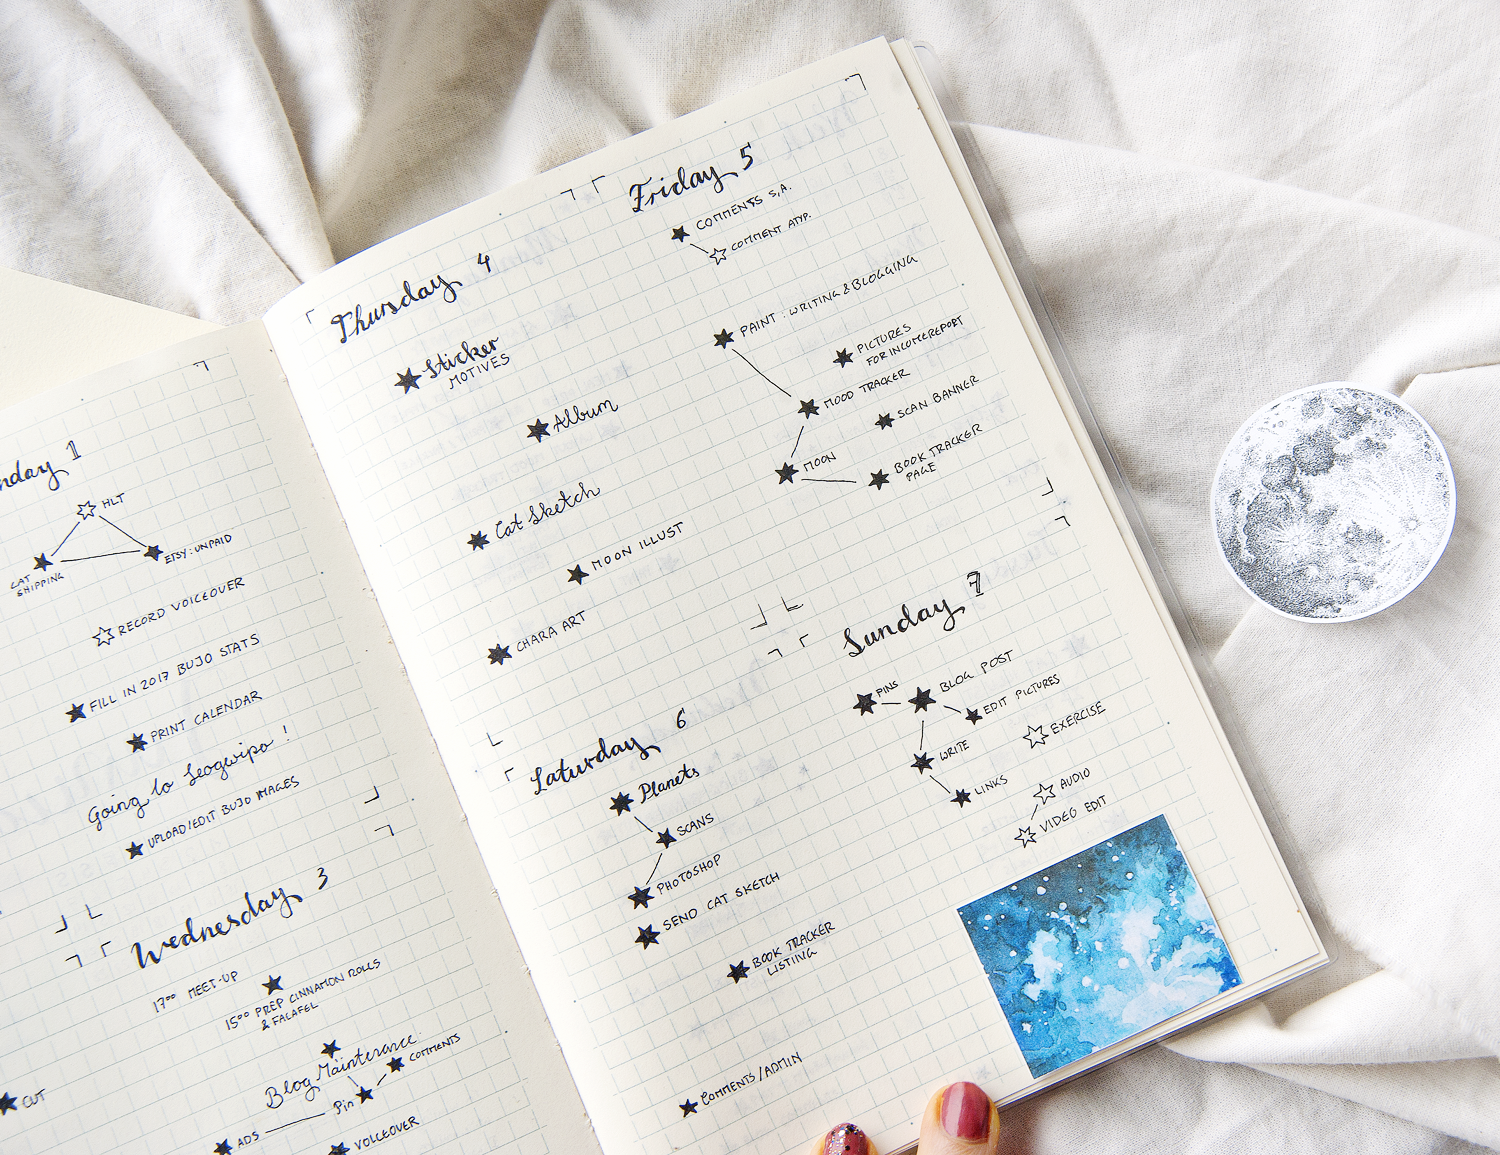 How To Track Your Reading With A Bullet Journal, Trackers, Goals, Book  Reviews + MORE